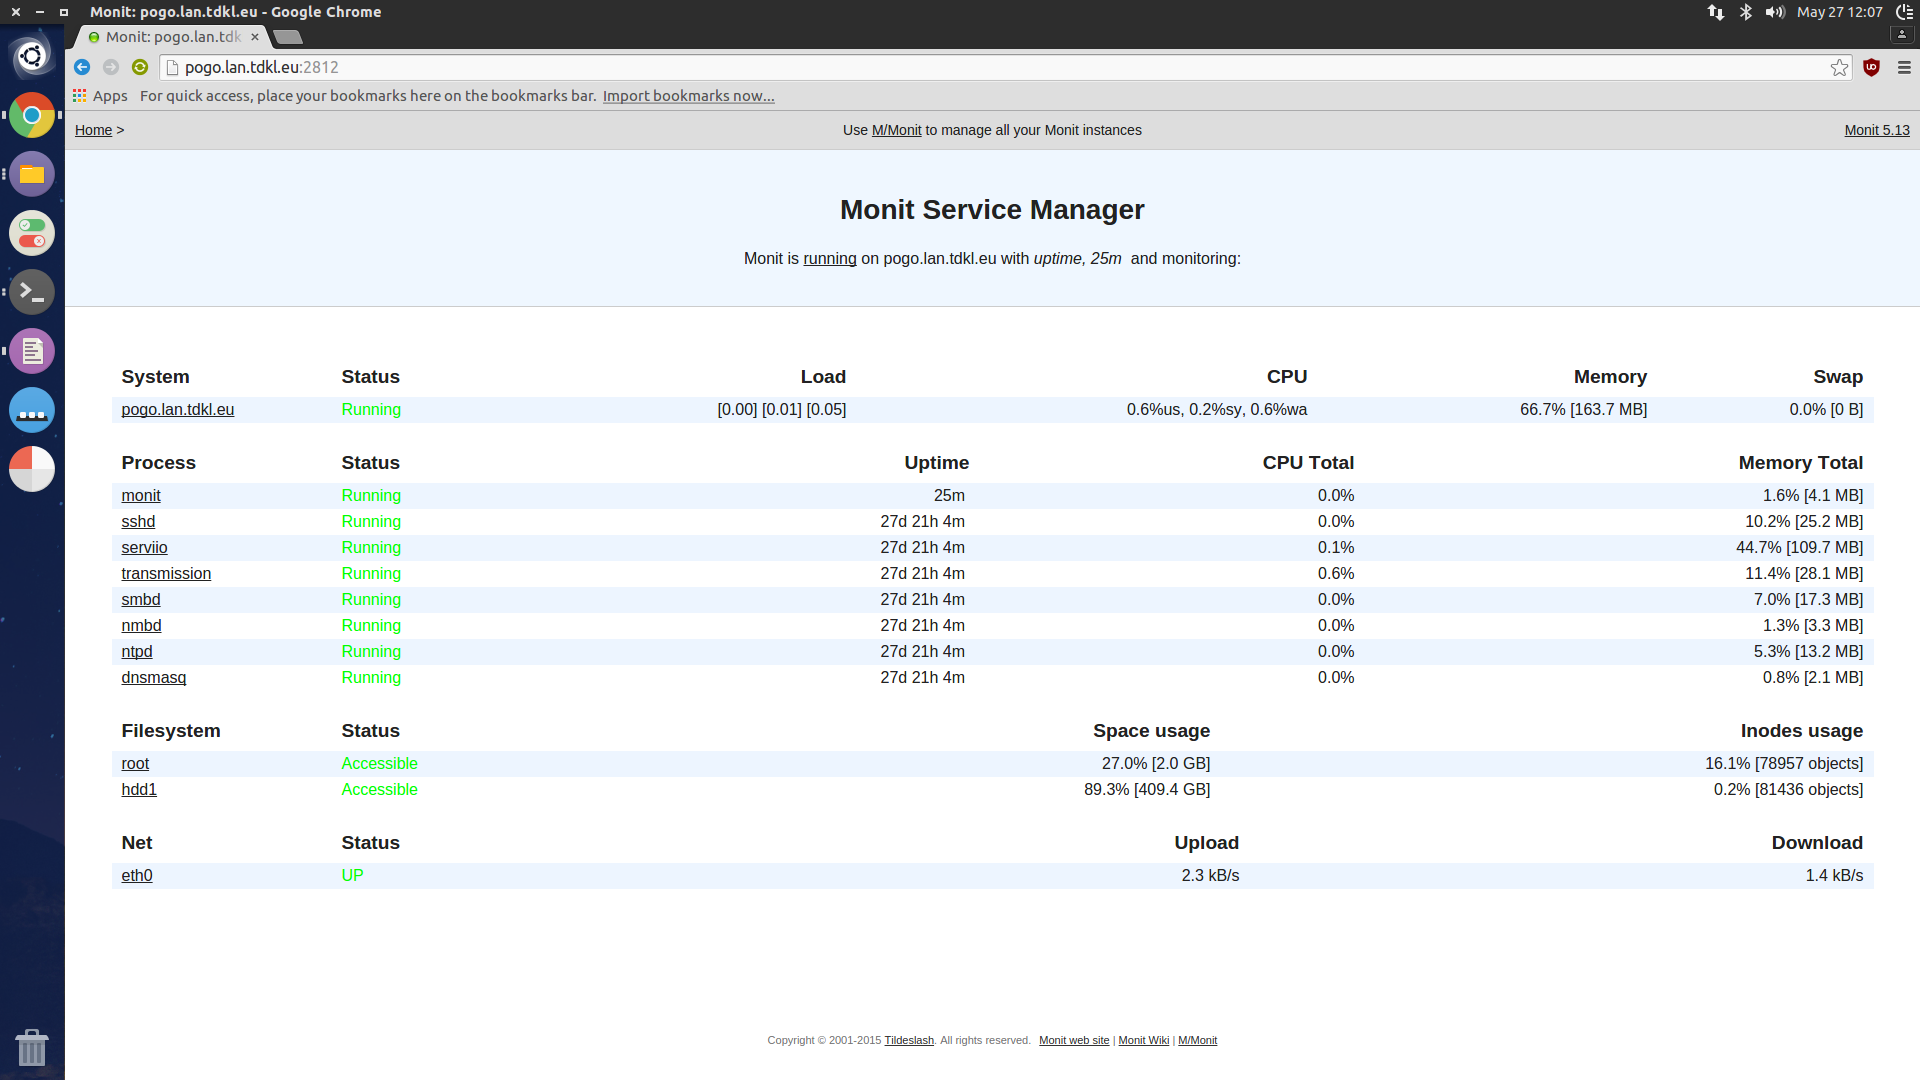 Screenshot of the dashboard in the browser which displays configured services, storage and network interface.